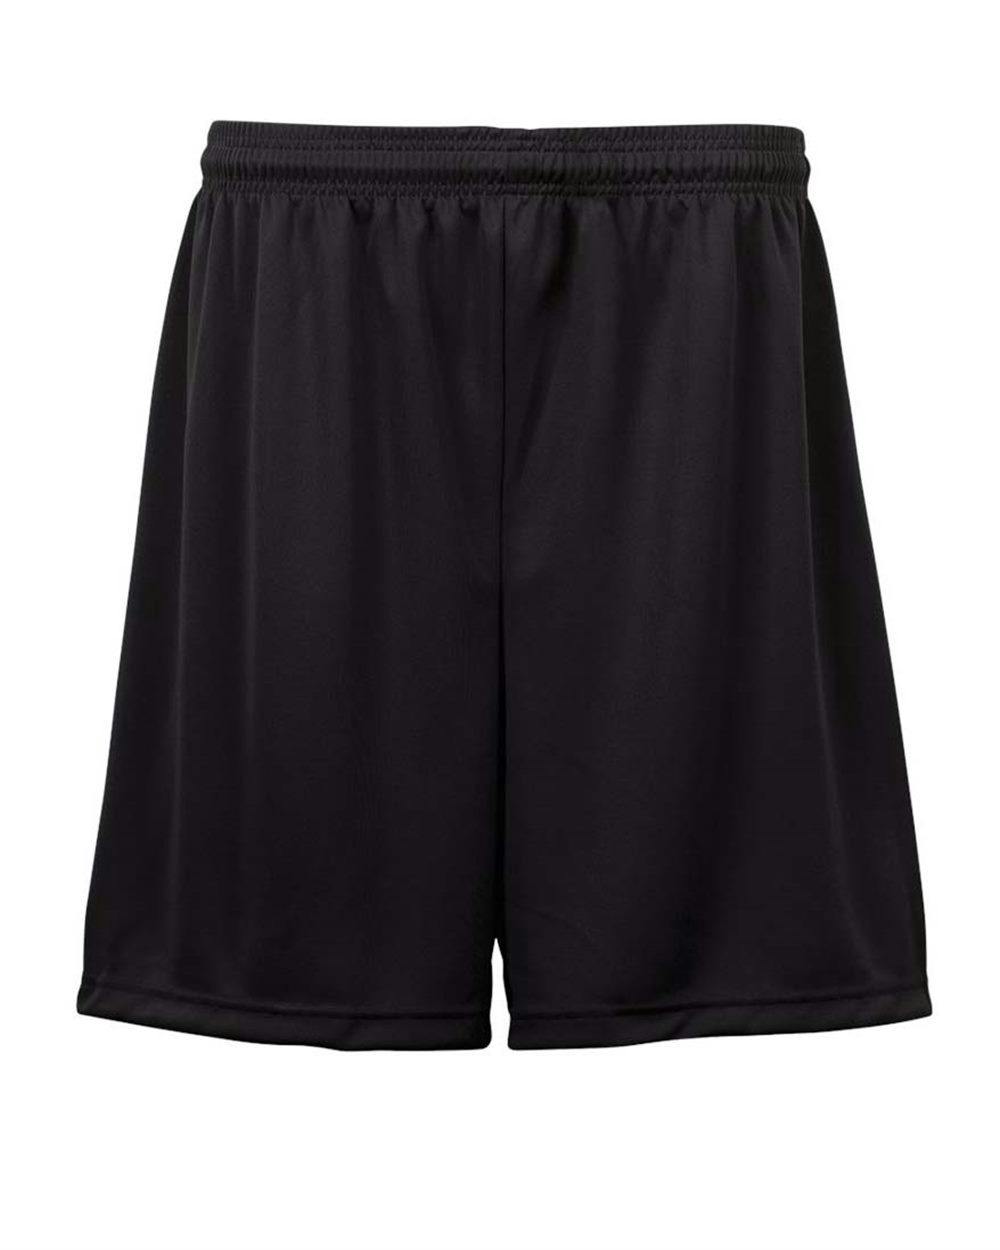 Image for Youth Performance Shorts - 5229